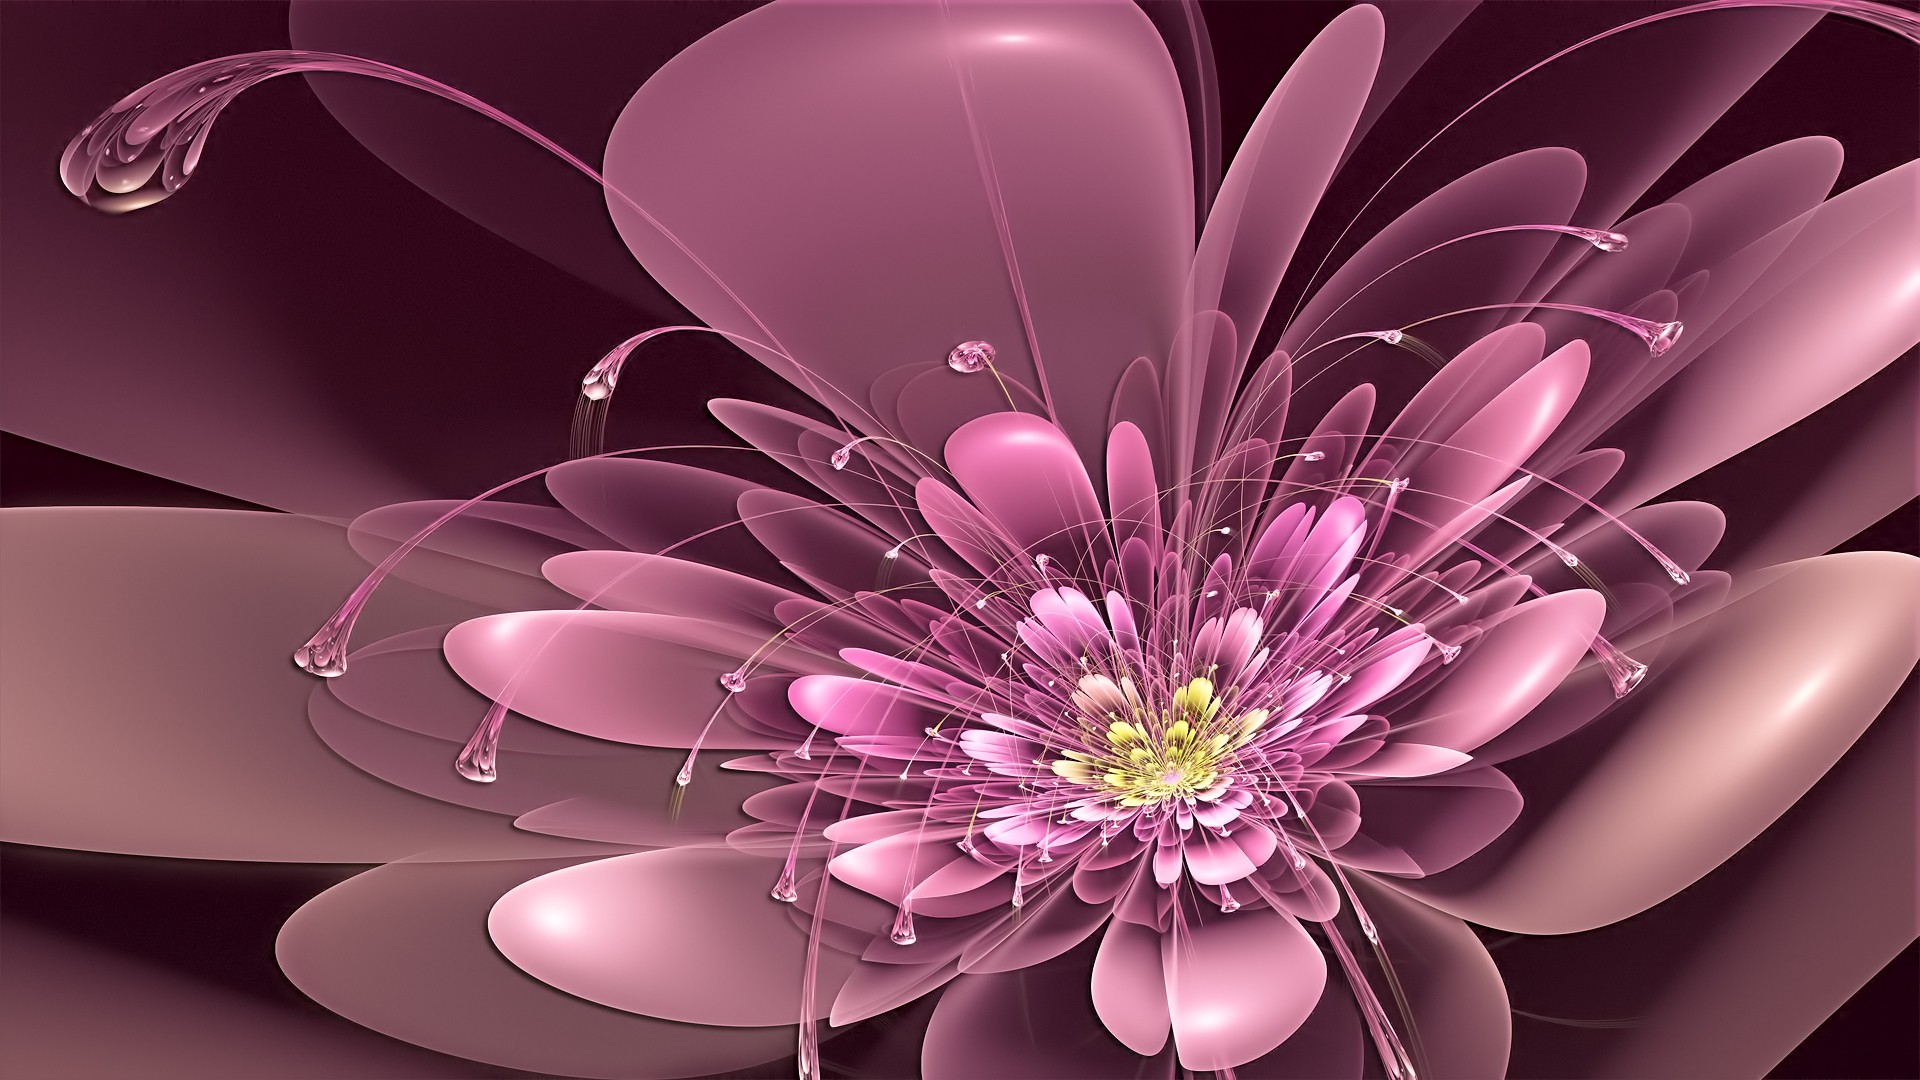 Abstract Flowers Wallpaper Sf